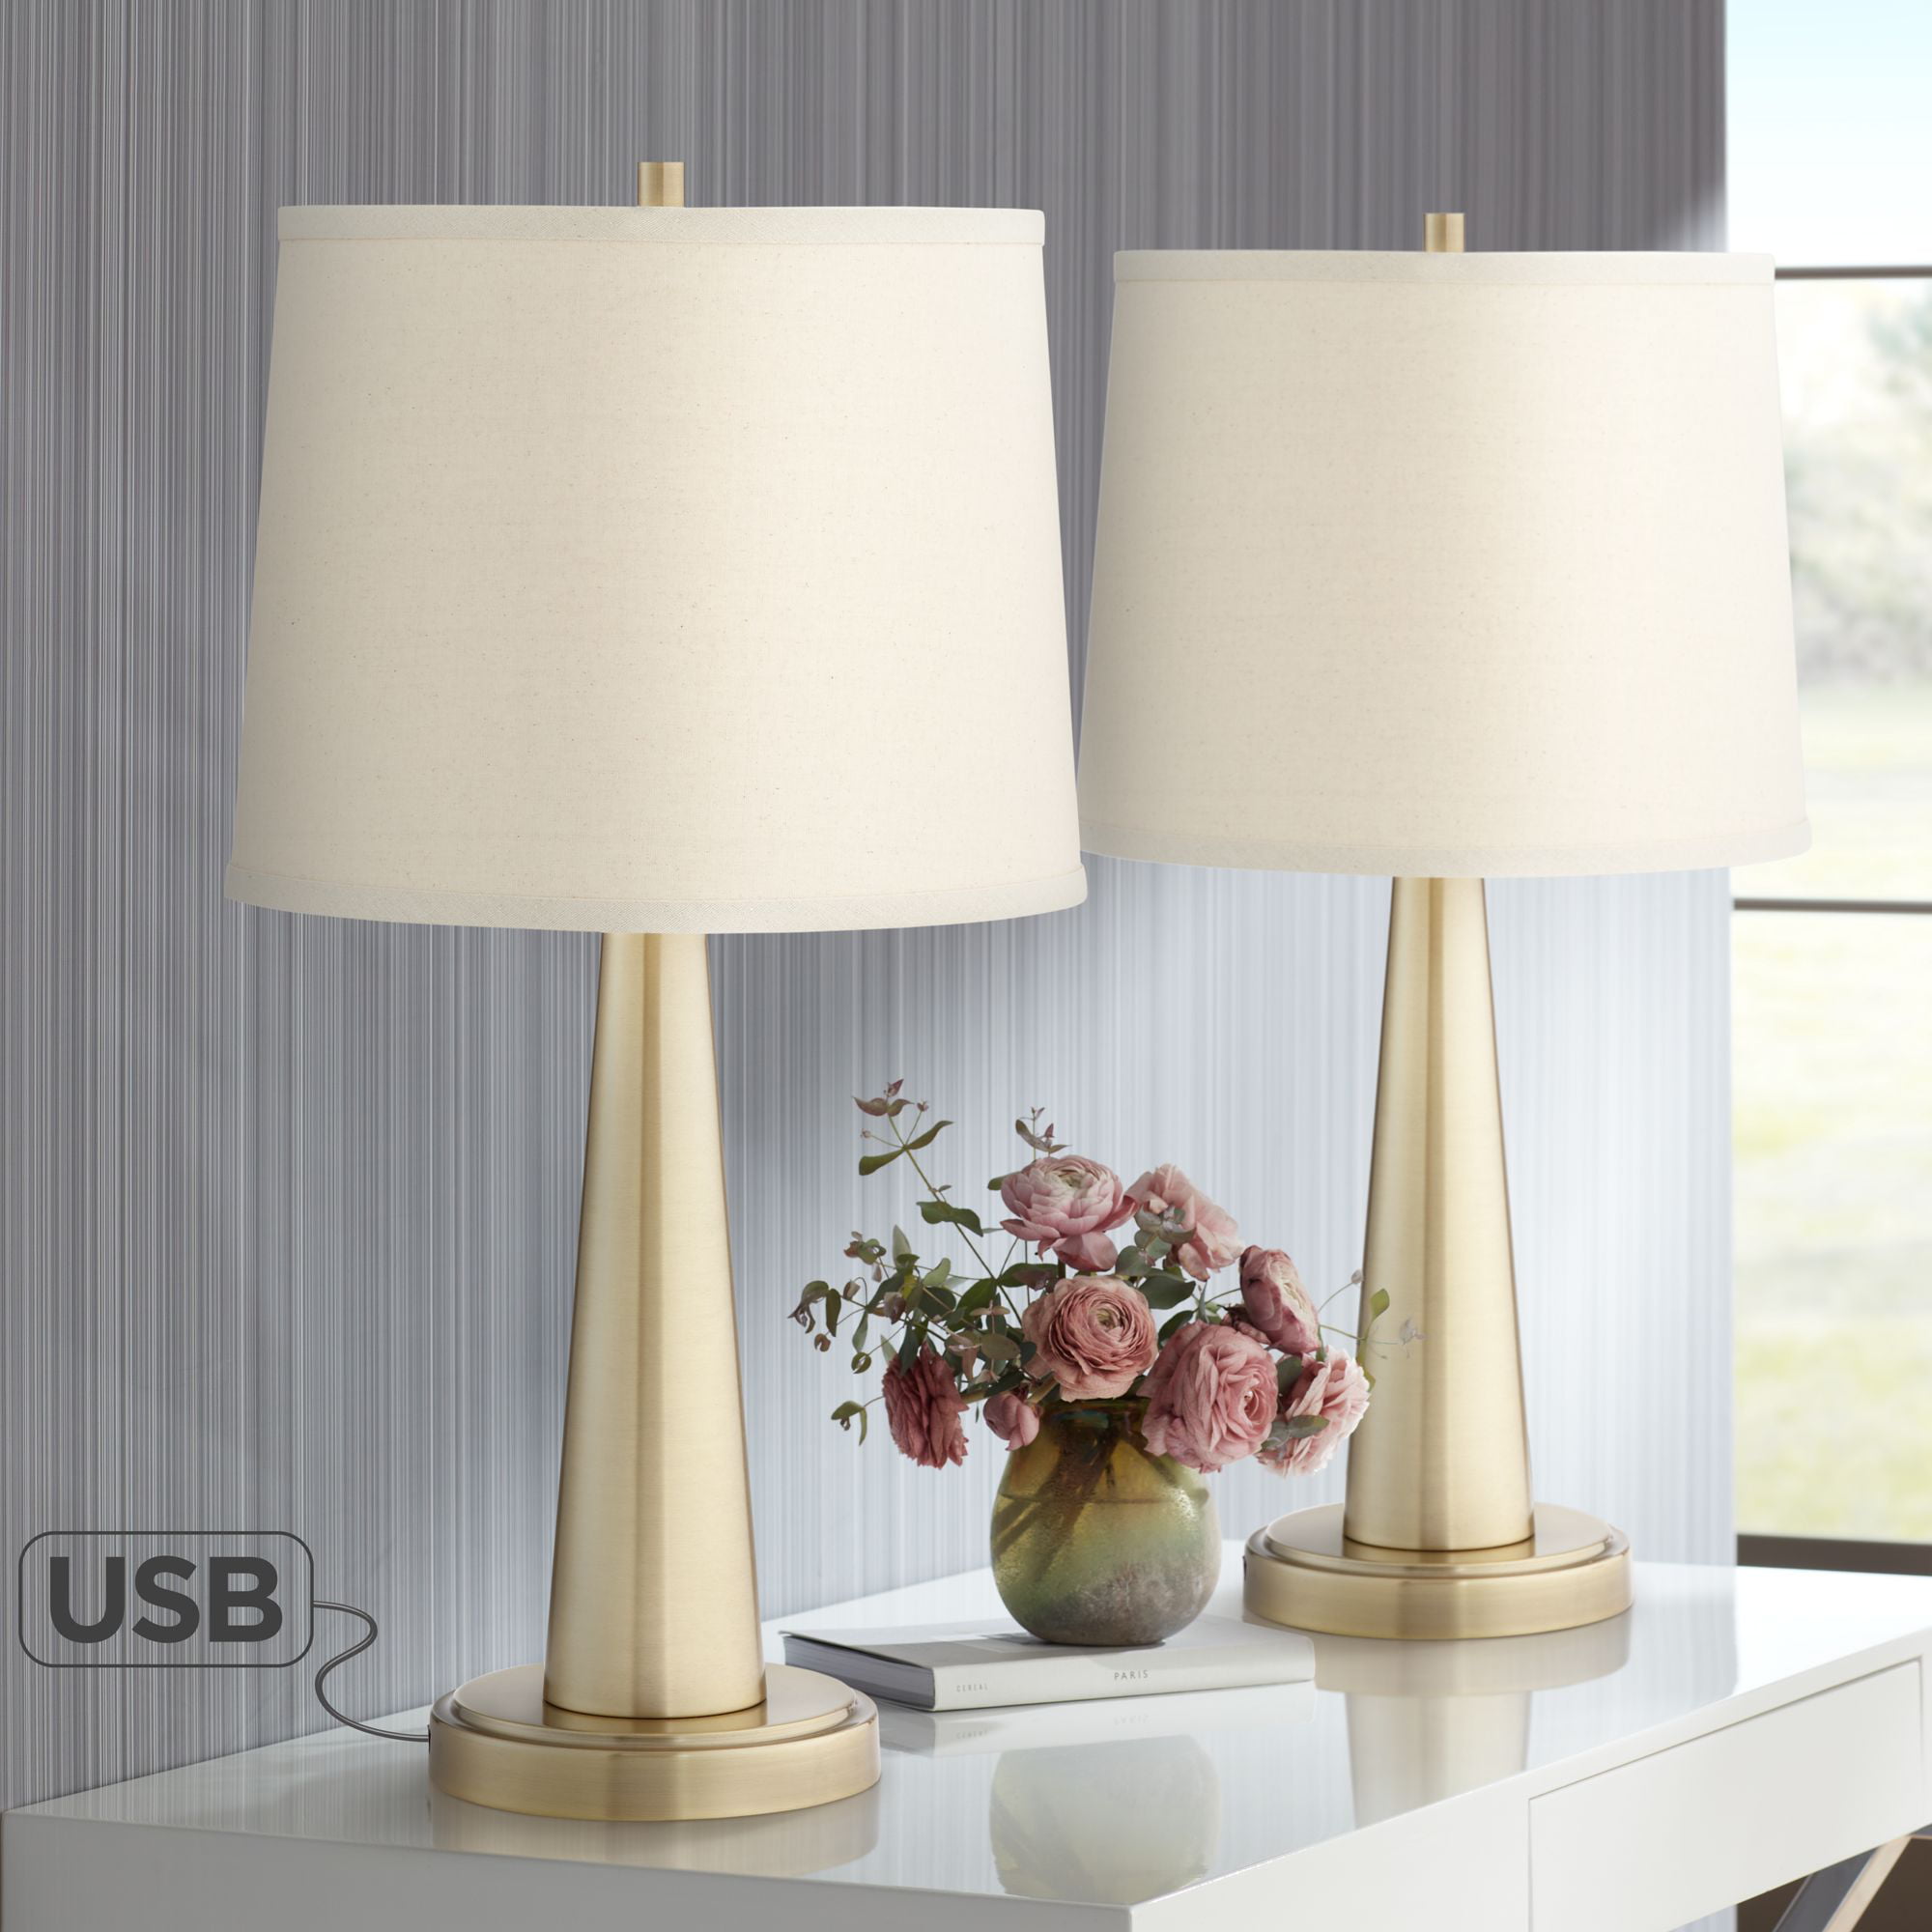 360 Lighting Modern Table Lamps Set Of, Best Crystal Table Lamps For Bedroom